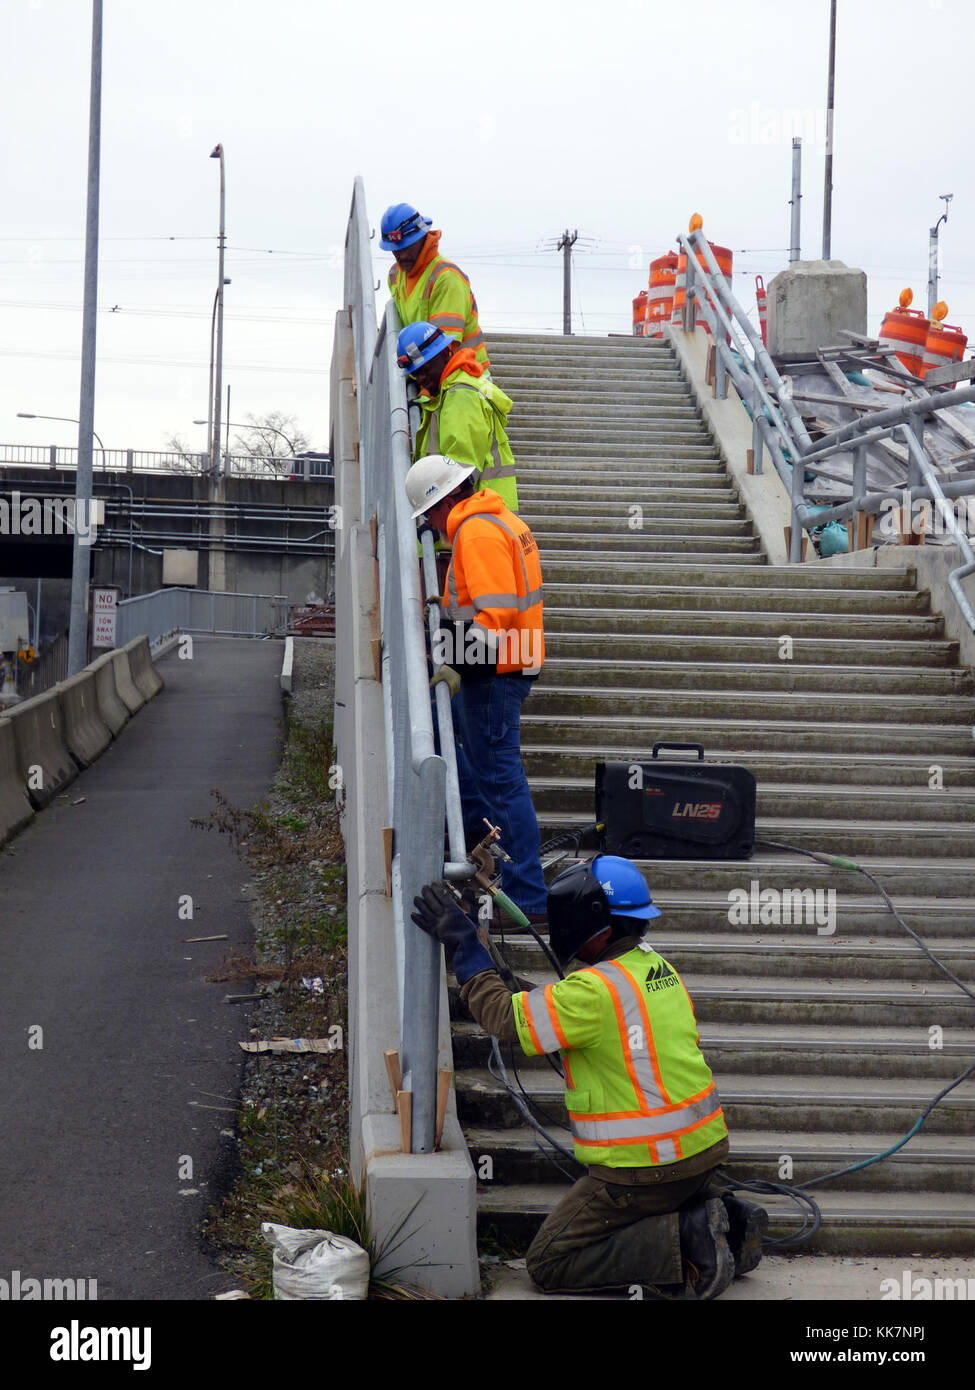 During the full closure on Jan. 28, crew members work together to install the new handrail along the path between the westbound SR 520 flyer stop and Montlake Boulevard. 12817 - Teamwork makes the dream work 31802421573 o Stock Photo